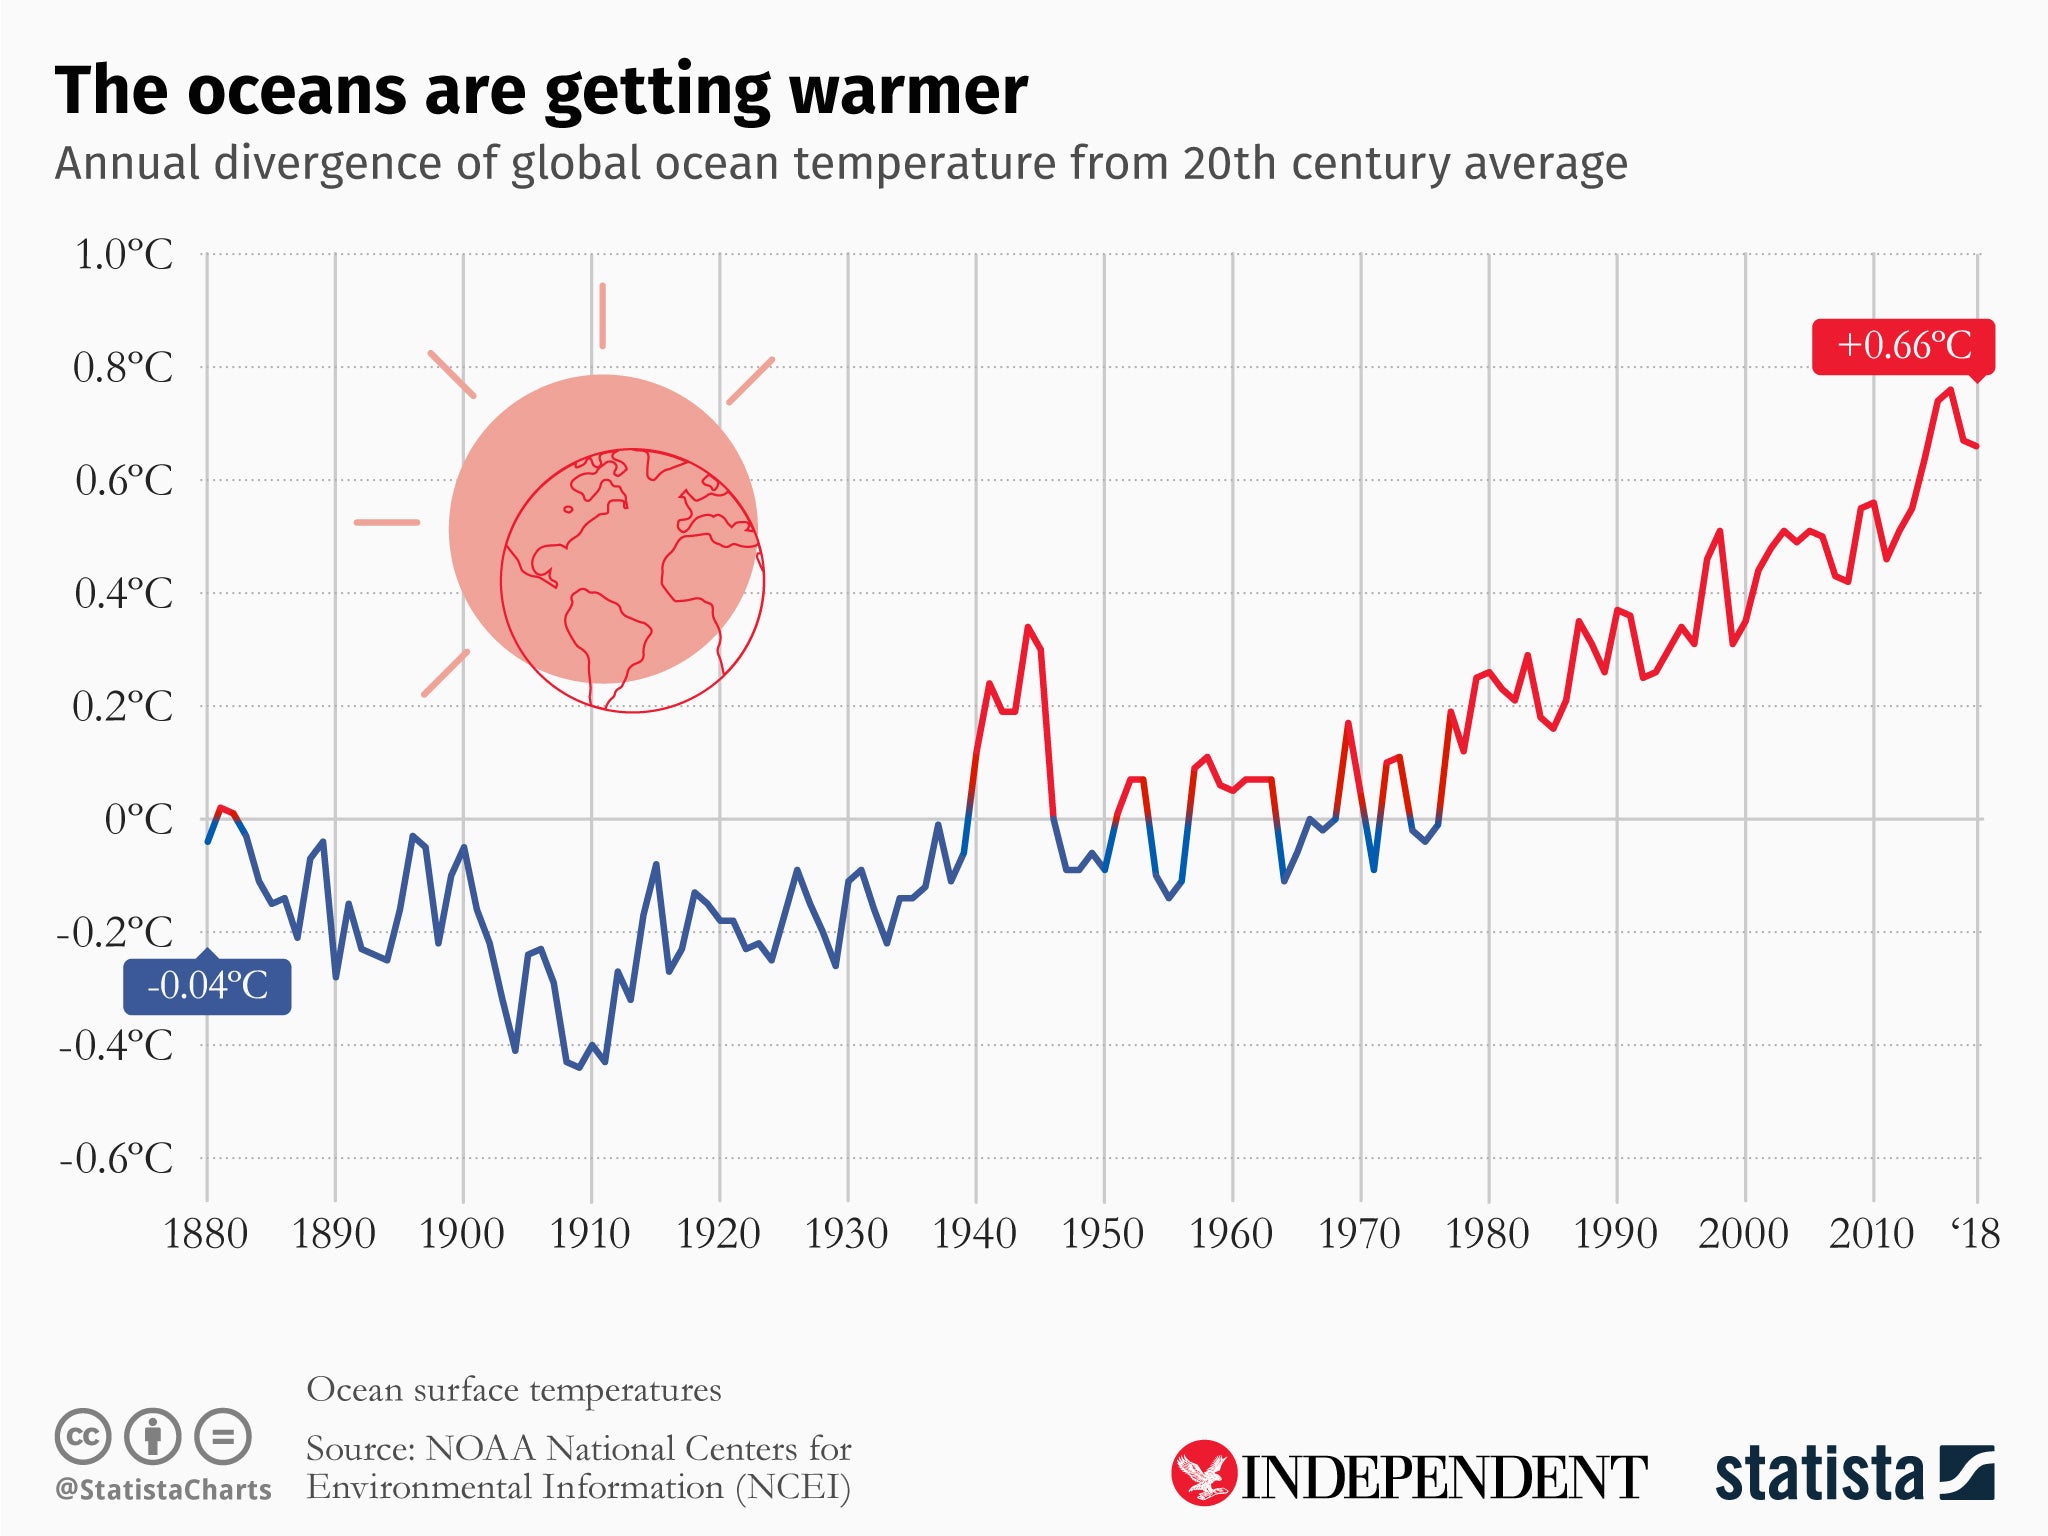 Chart depits warming of the oceans